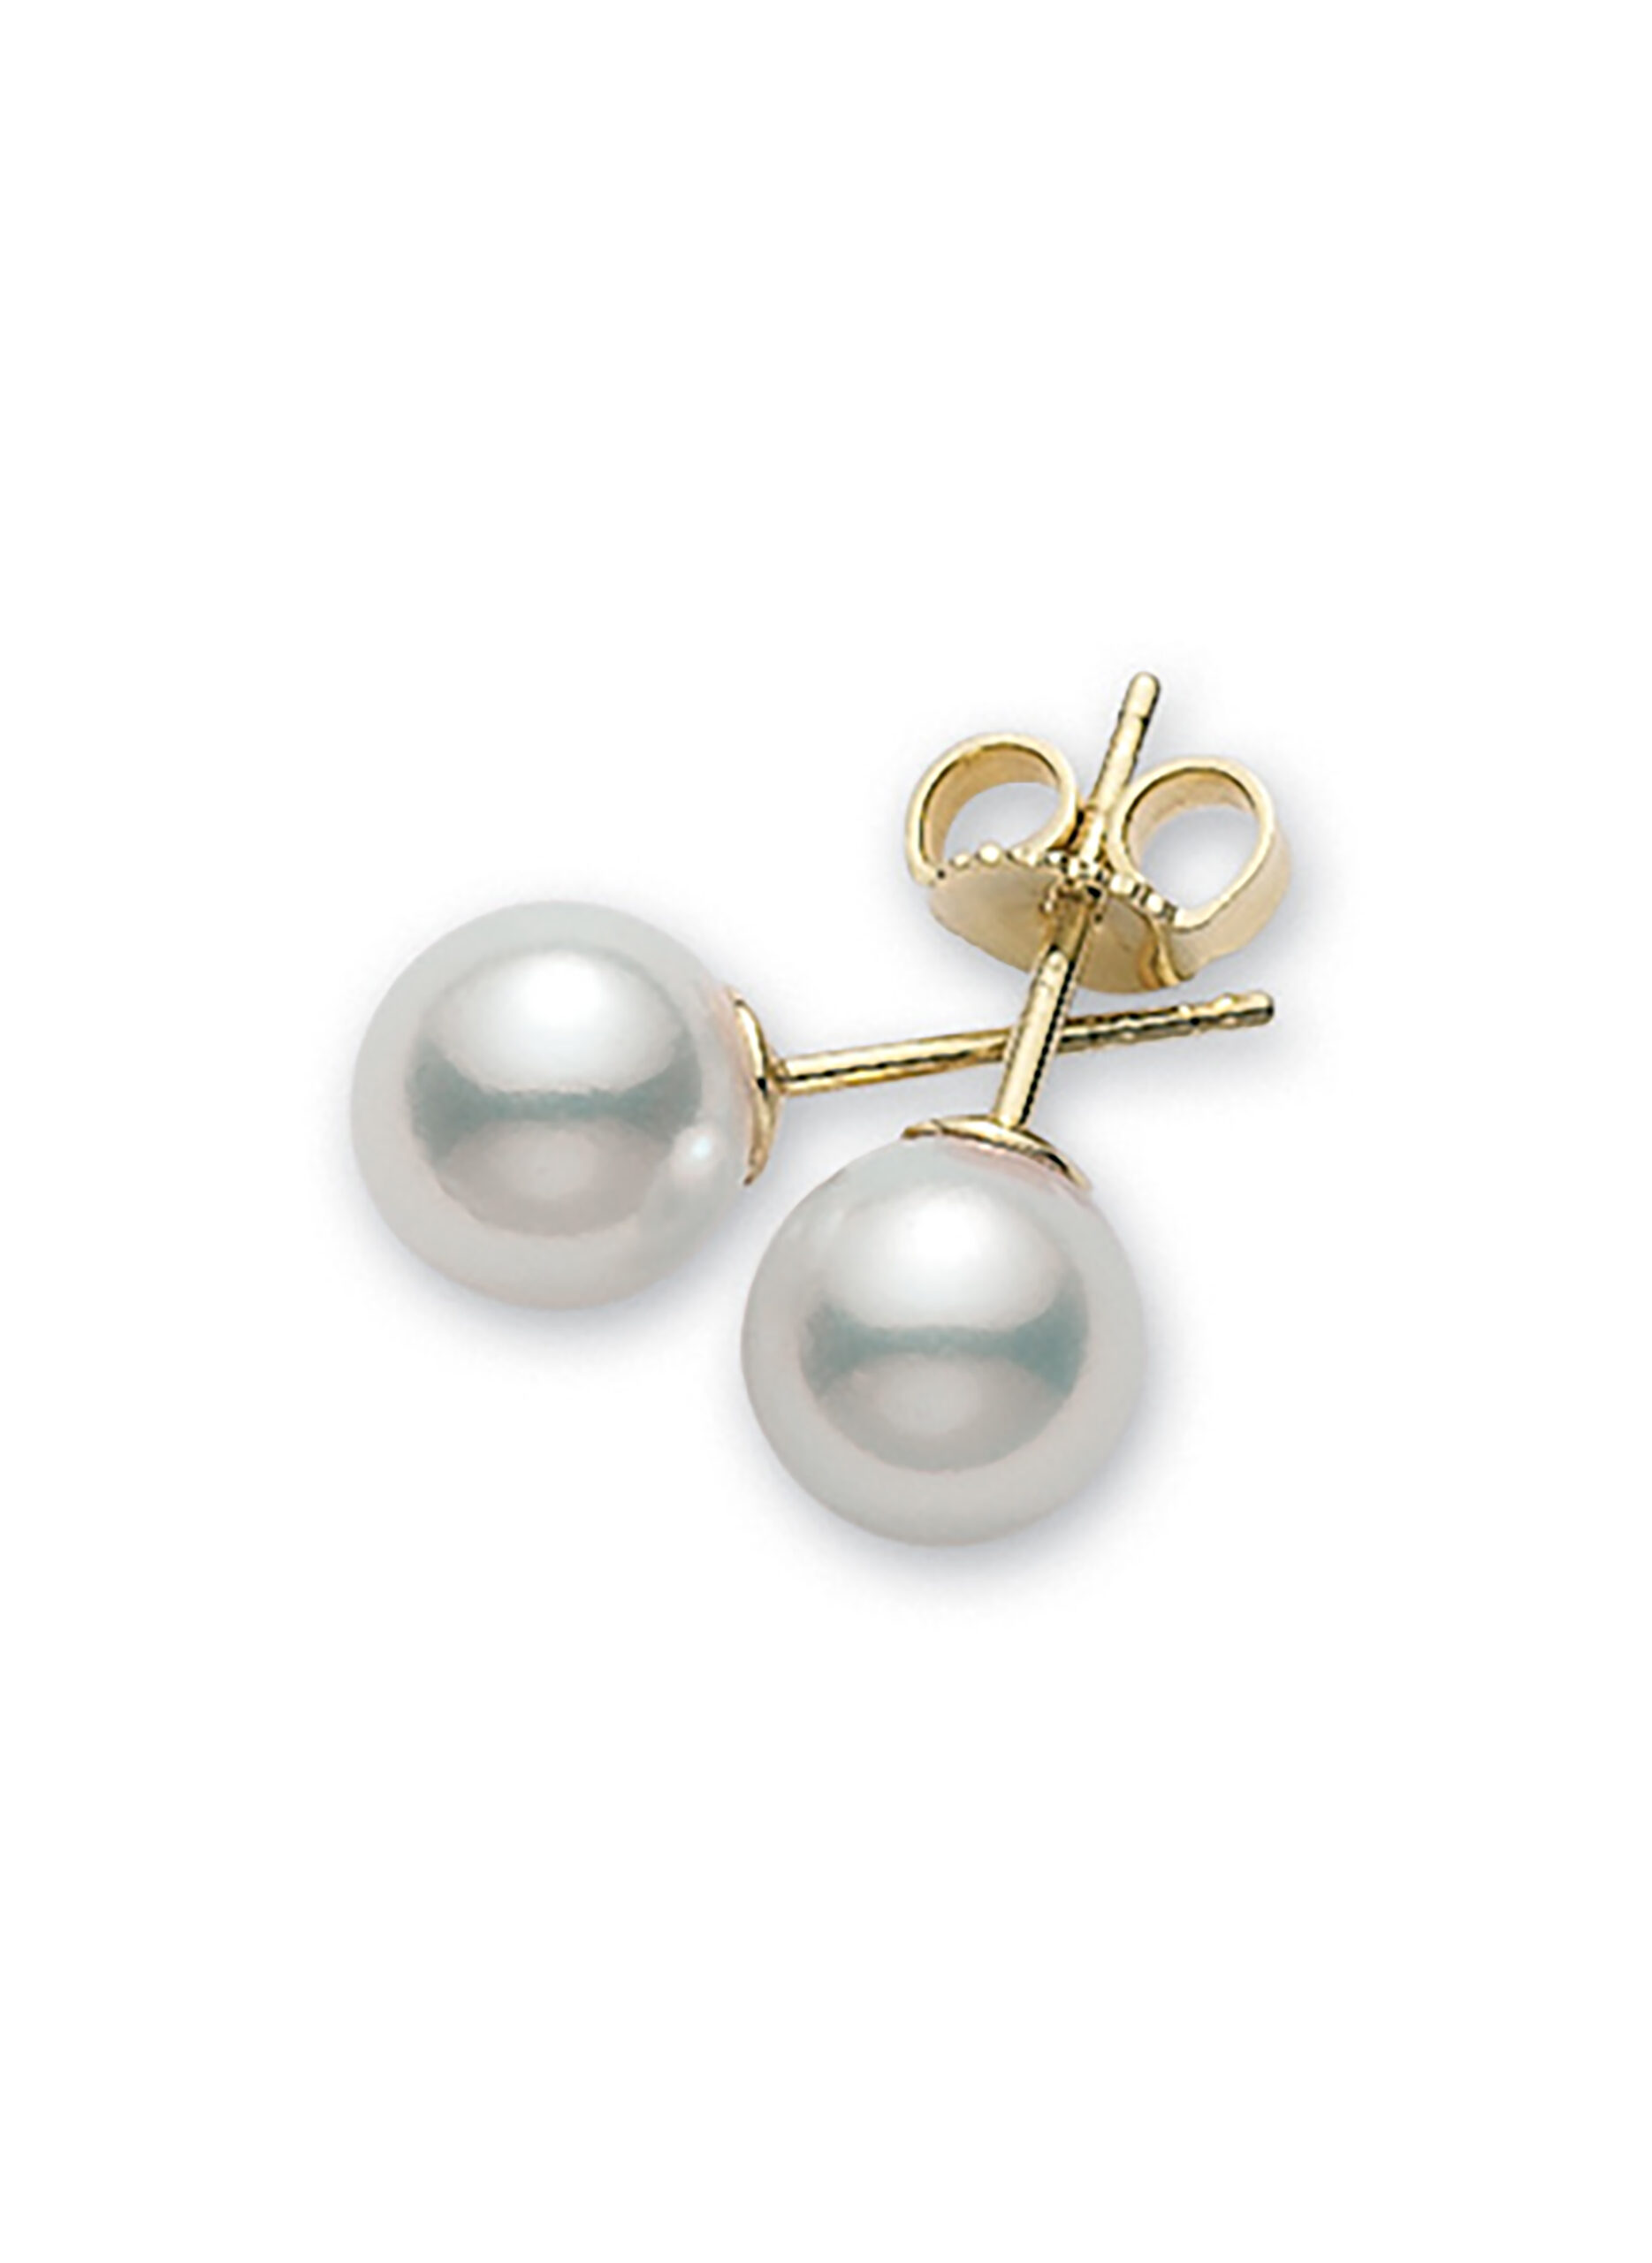 This pair of stud earrings from Mikimoto is crafted from 18k yellow gold and features two 5-5.5mm white pearls.